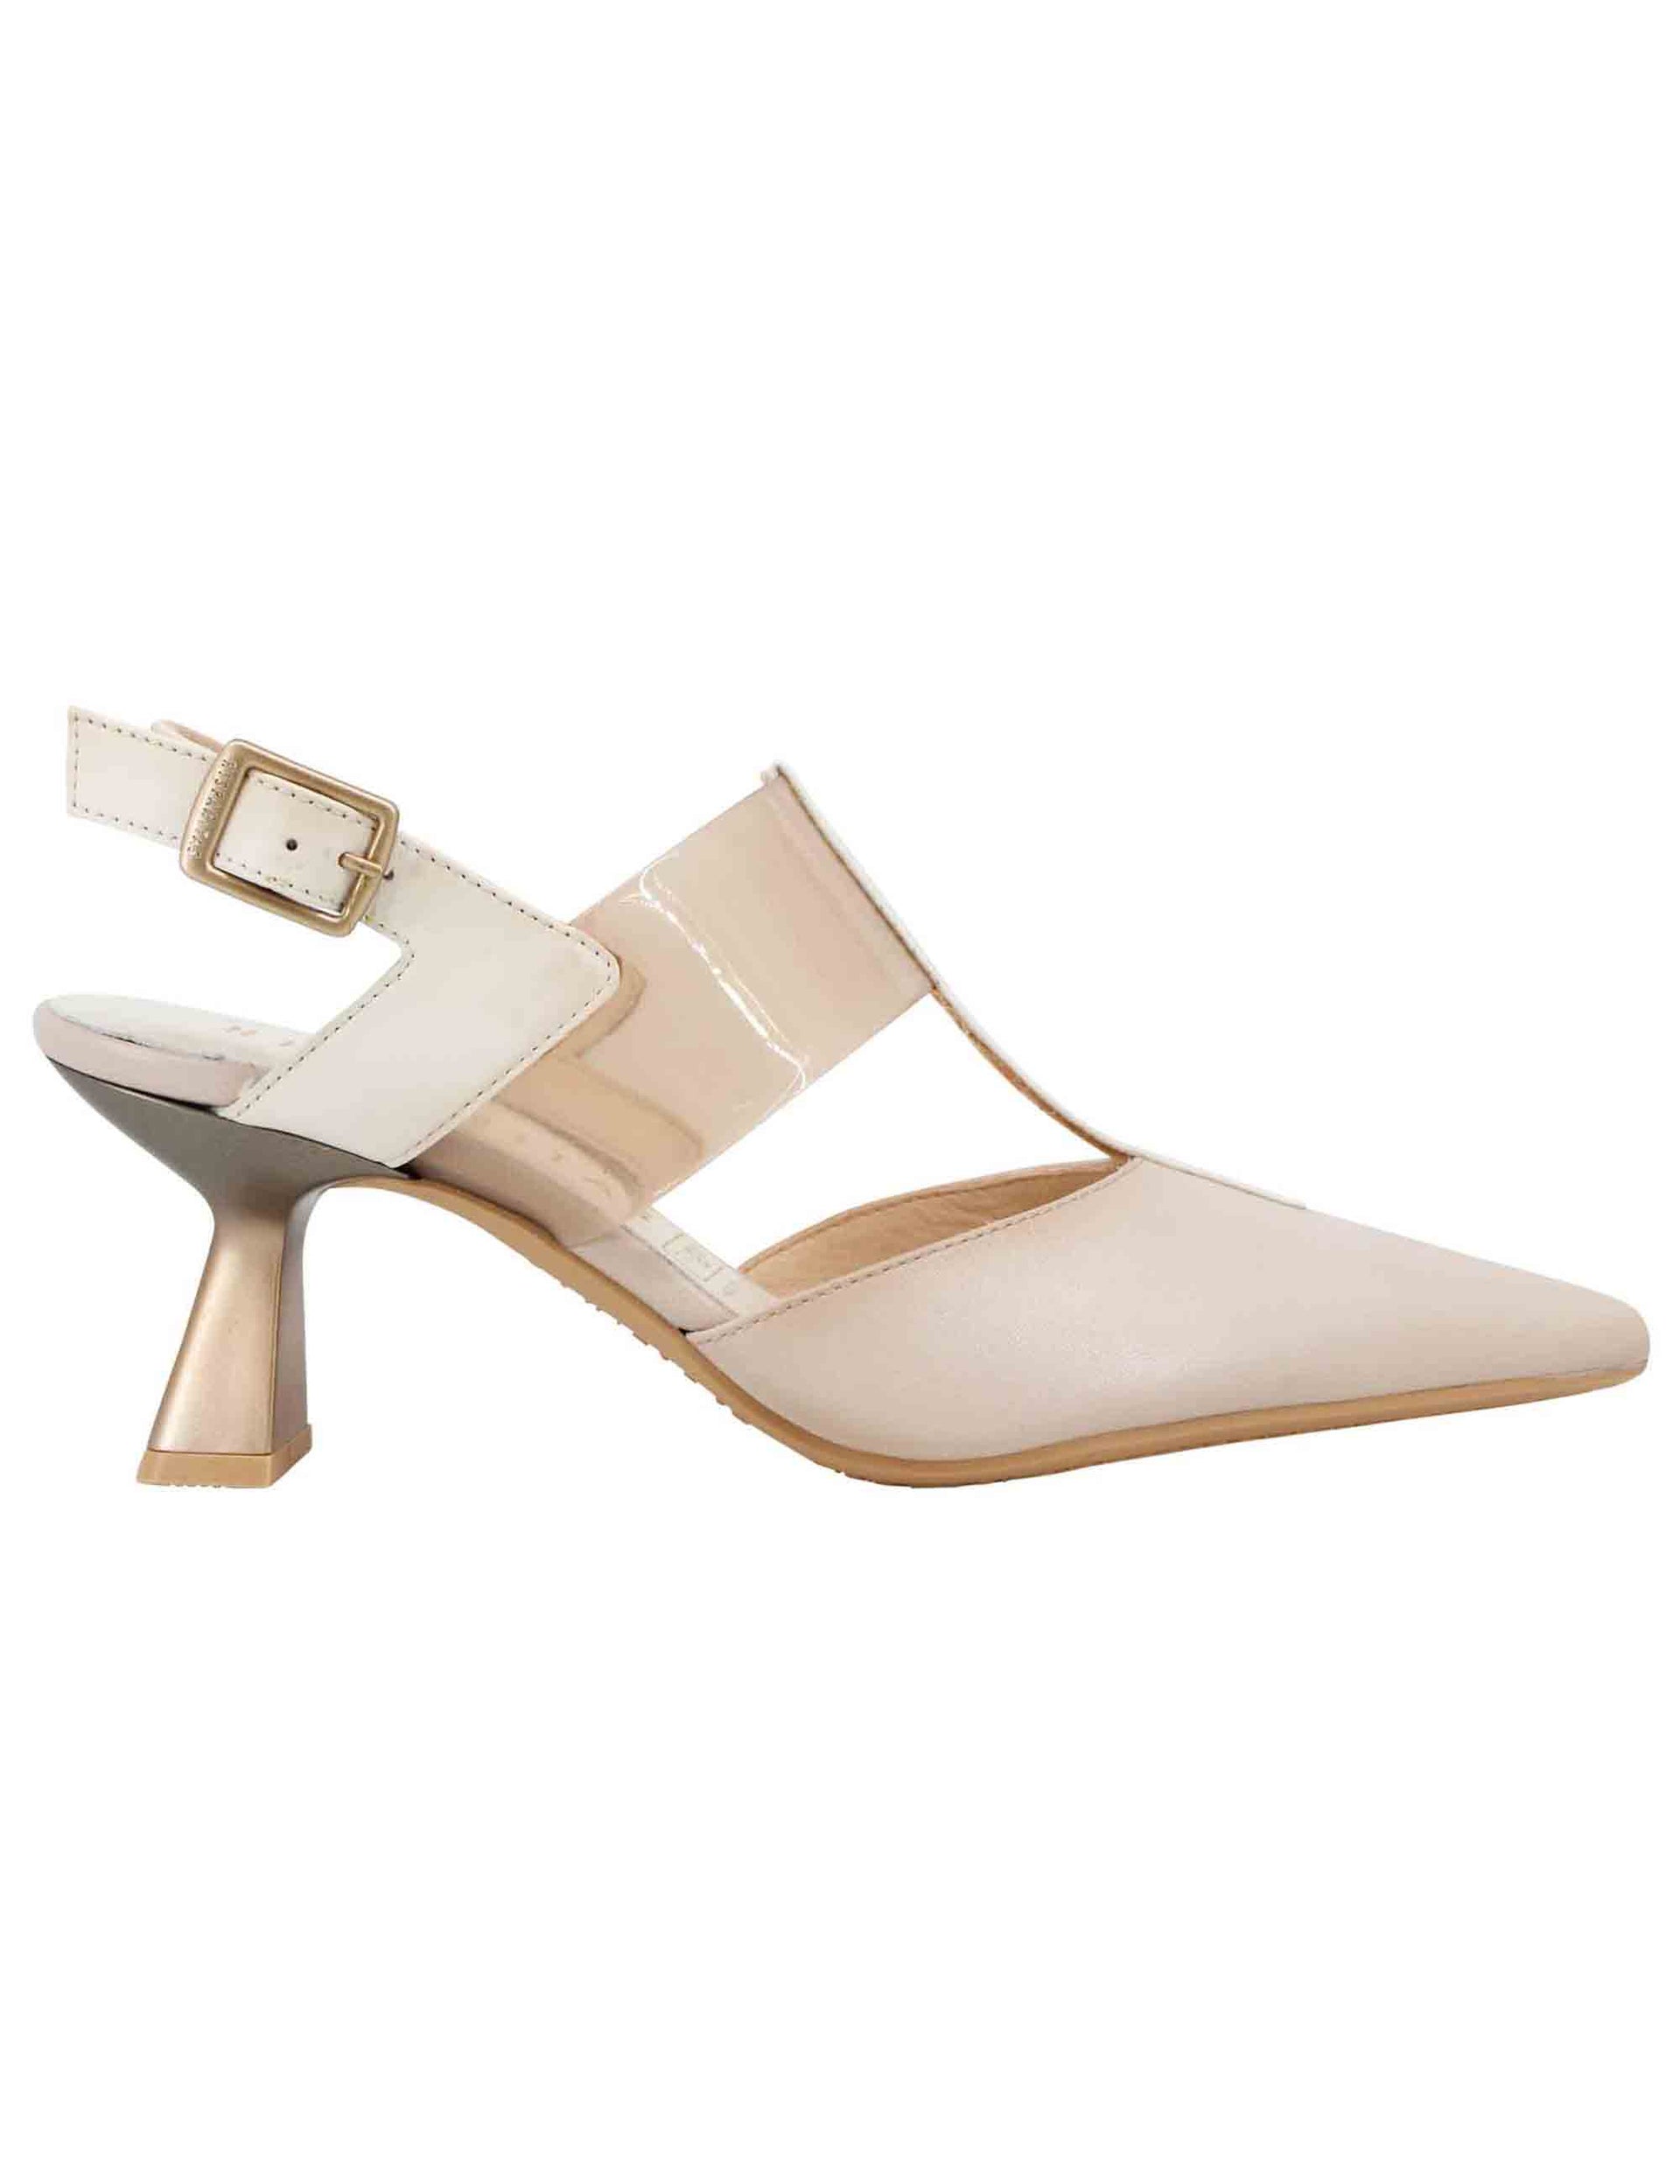 Women's slingback pumps in beige leather with pointed toe